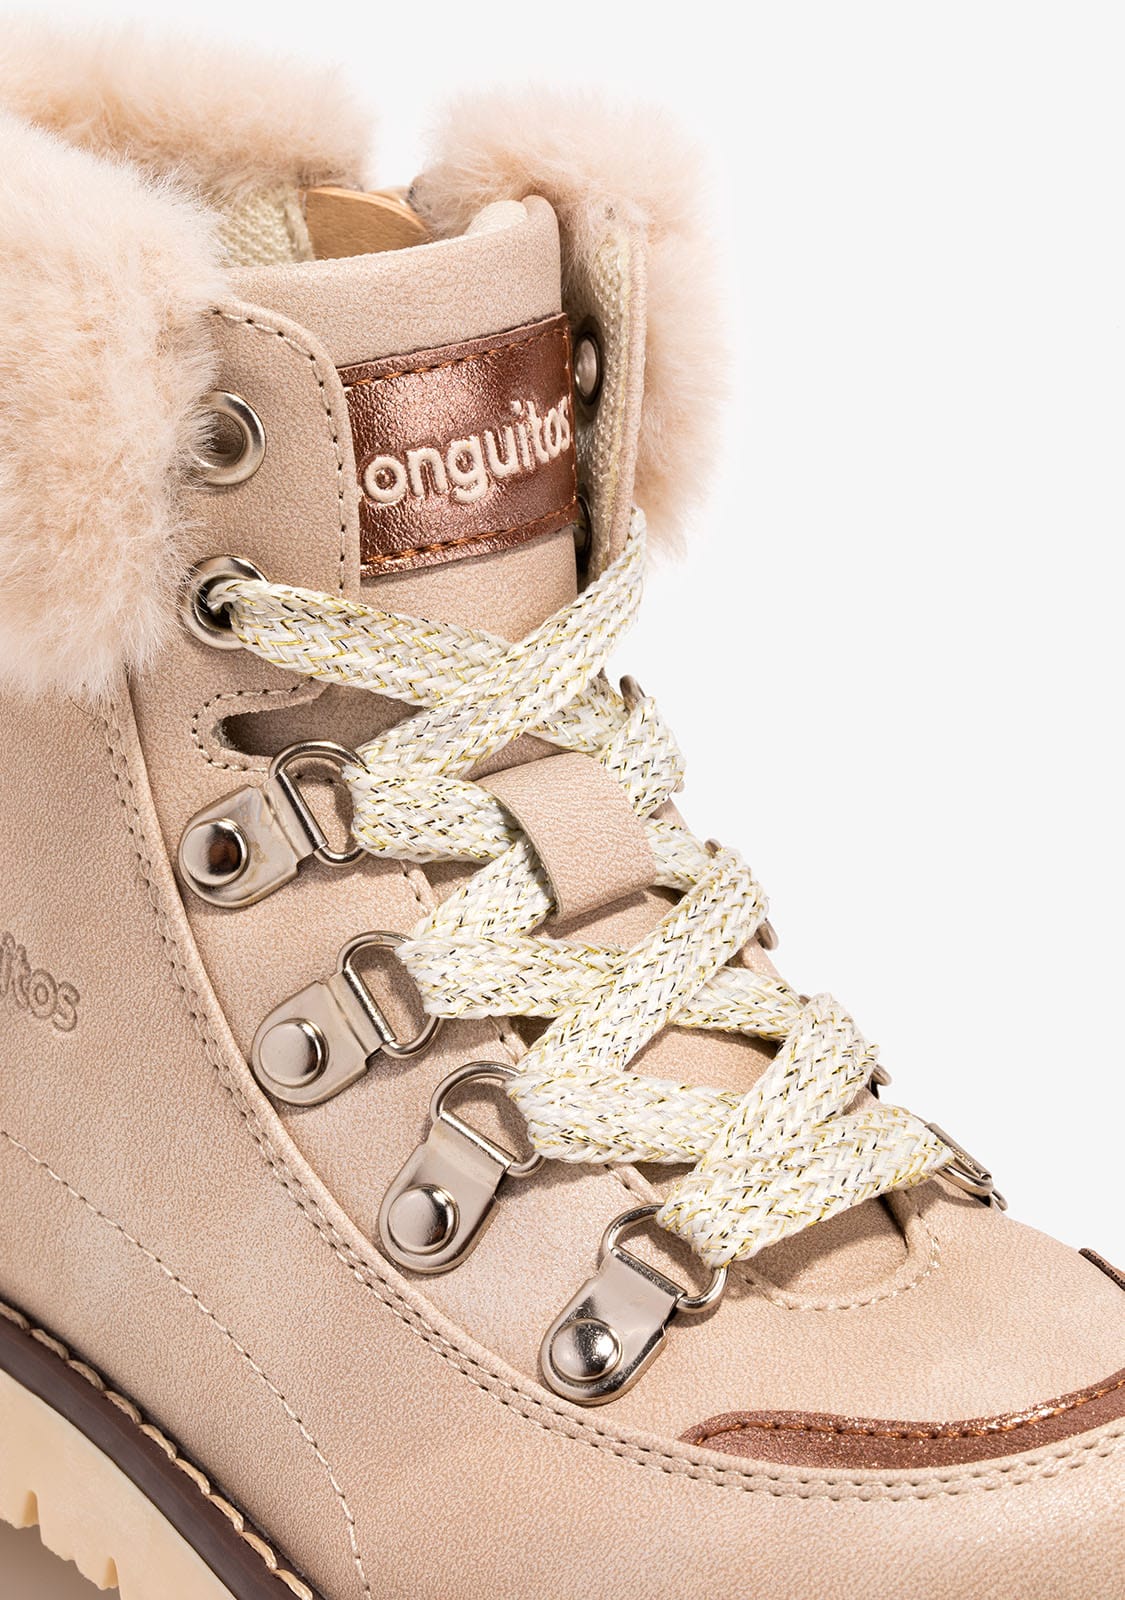 CONGUITOS Shoes Girl's Beige Cord Boots